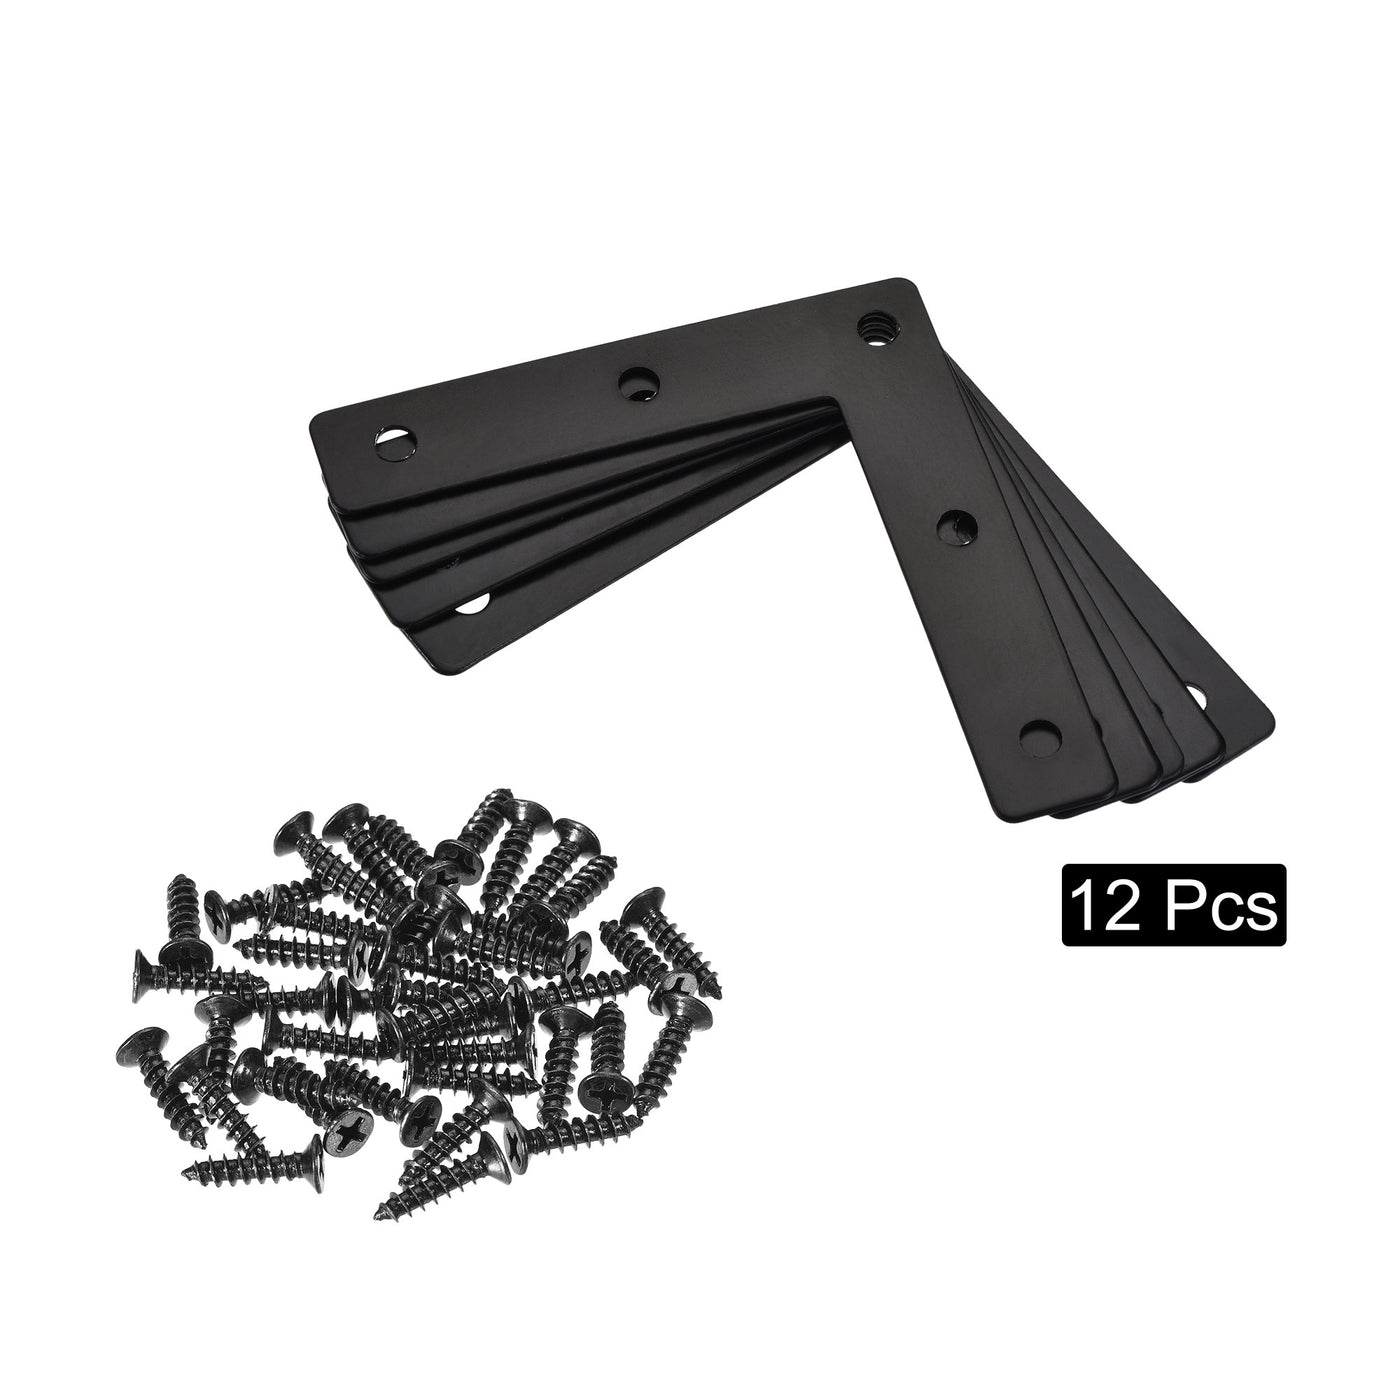 uxcell Uxcell L Shape Brace 80mmx80mm Mending Repairing Flat Brackets for Joint Fastener with Screws Black 12Pcs